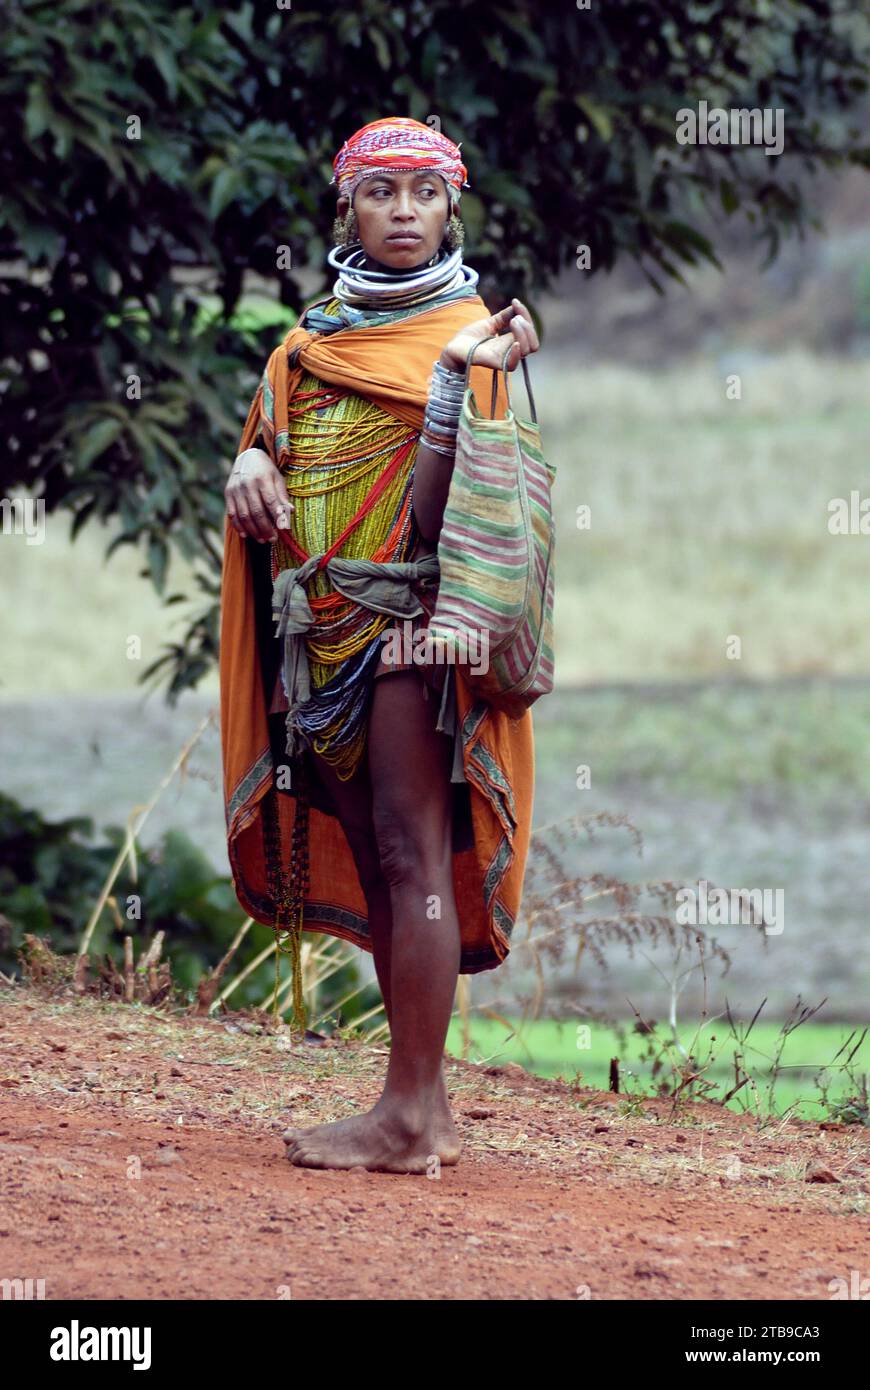 The Bonda, also known as Remo, are a Munda ethnic group who live in the isolated hill regions of the Malkangiri district of southwestern Odisha, near the junction of the three states of Odisha, Chhattisgarh, and Andhra Pradesh. The tribe is one of the oldest and most primitive in mainland India; their culture has changed little for more than a thousand years. They are one of the 75 Primitive Tribal Groups identified by the Government of India. Stock Photo